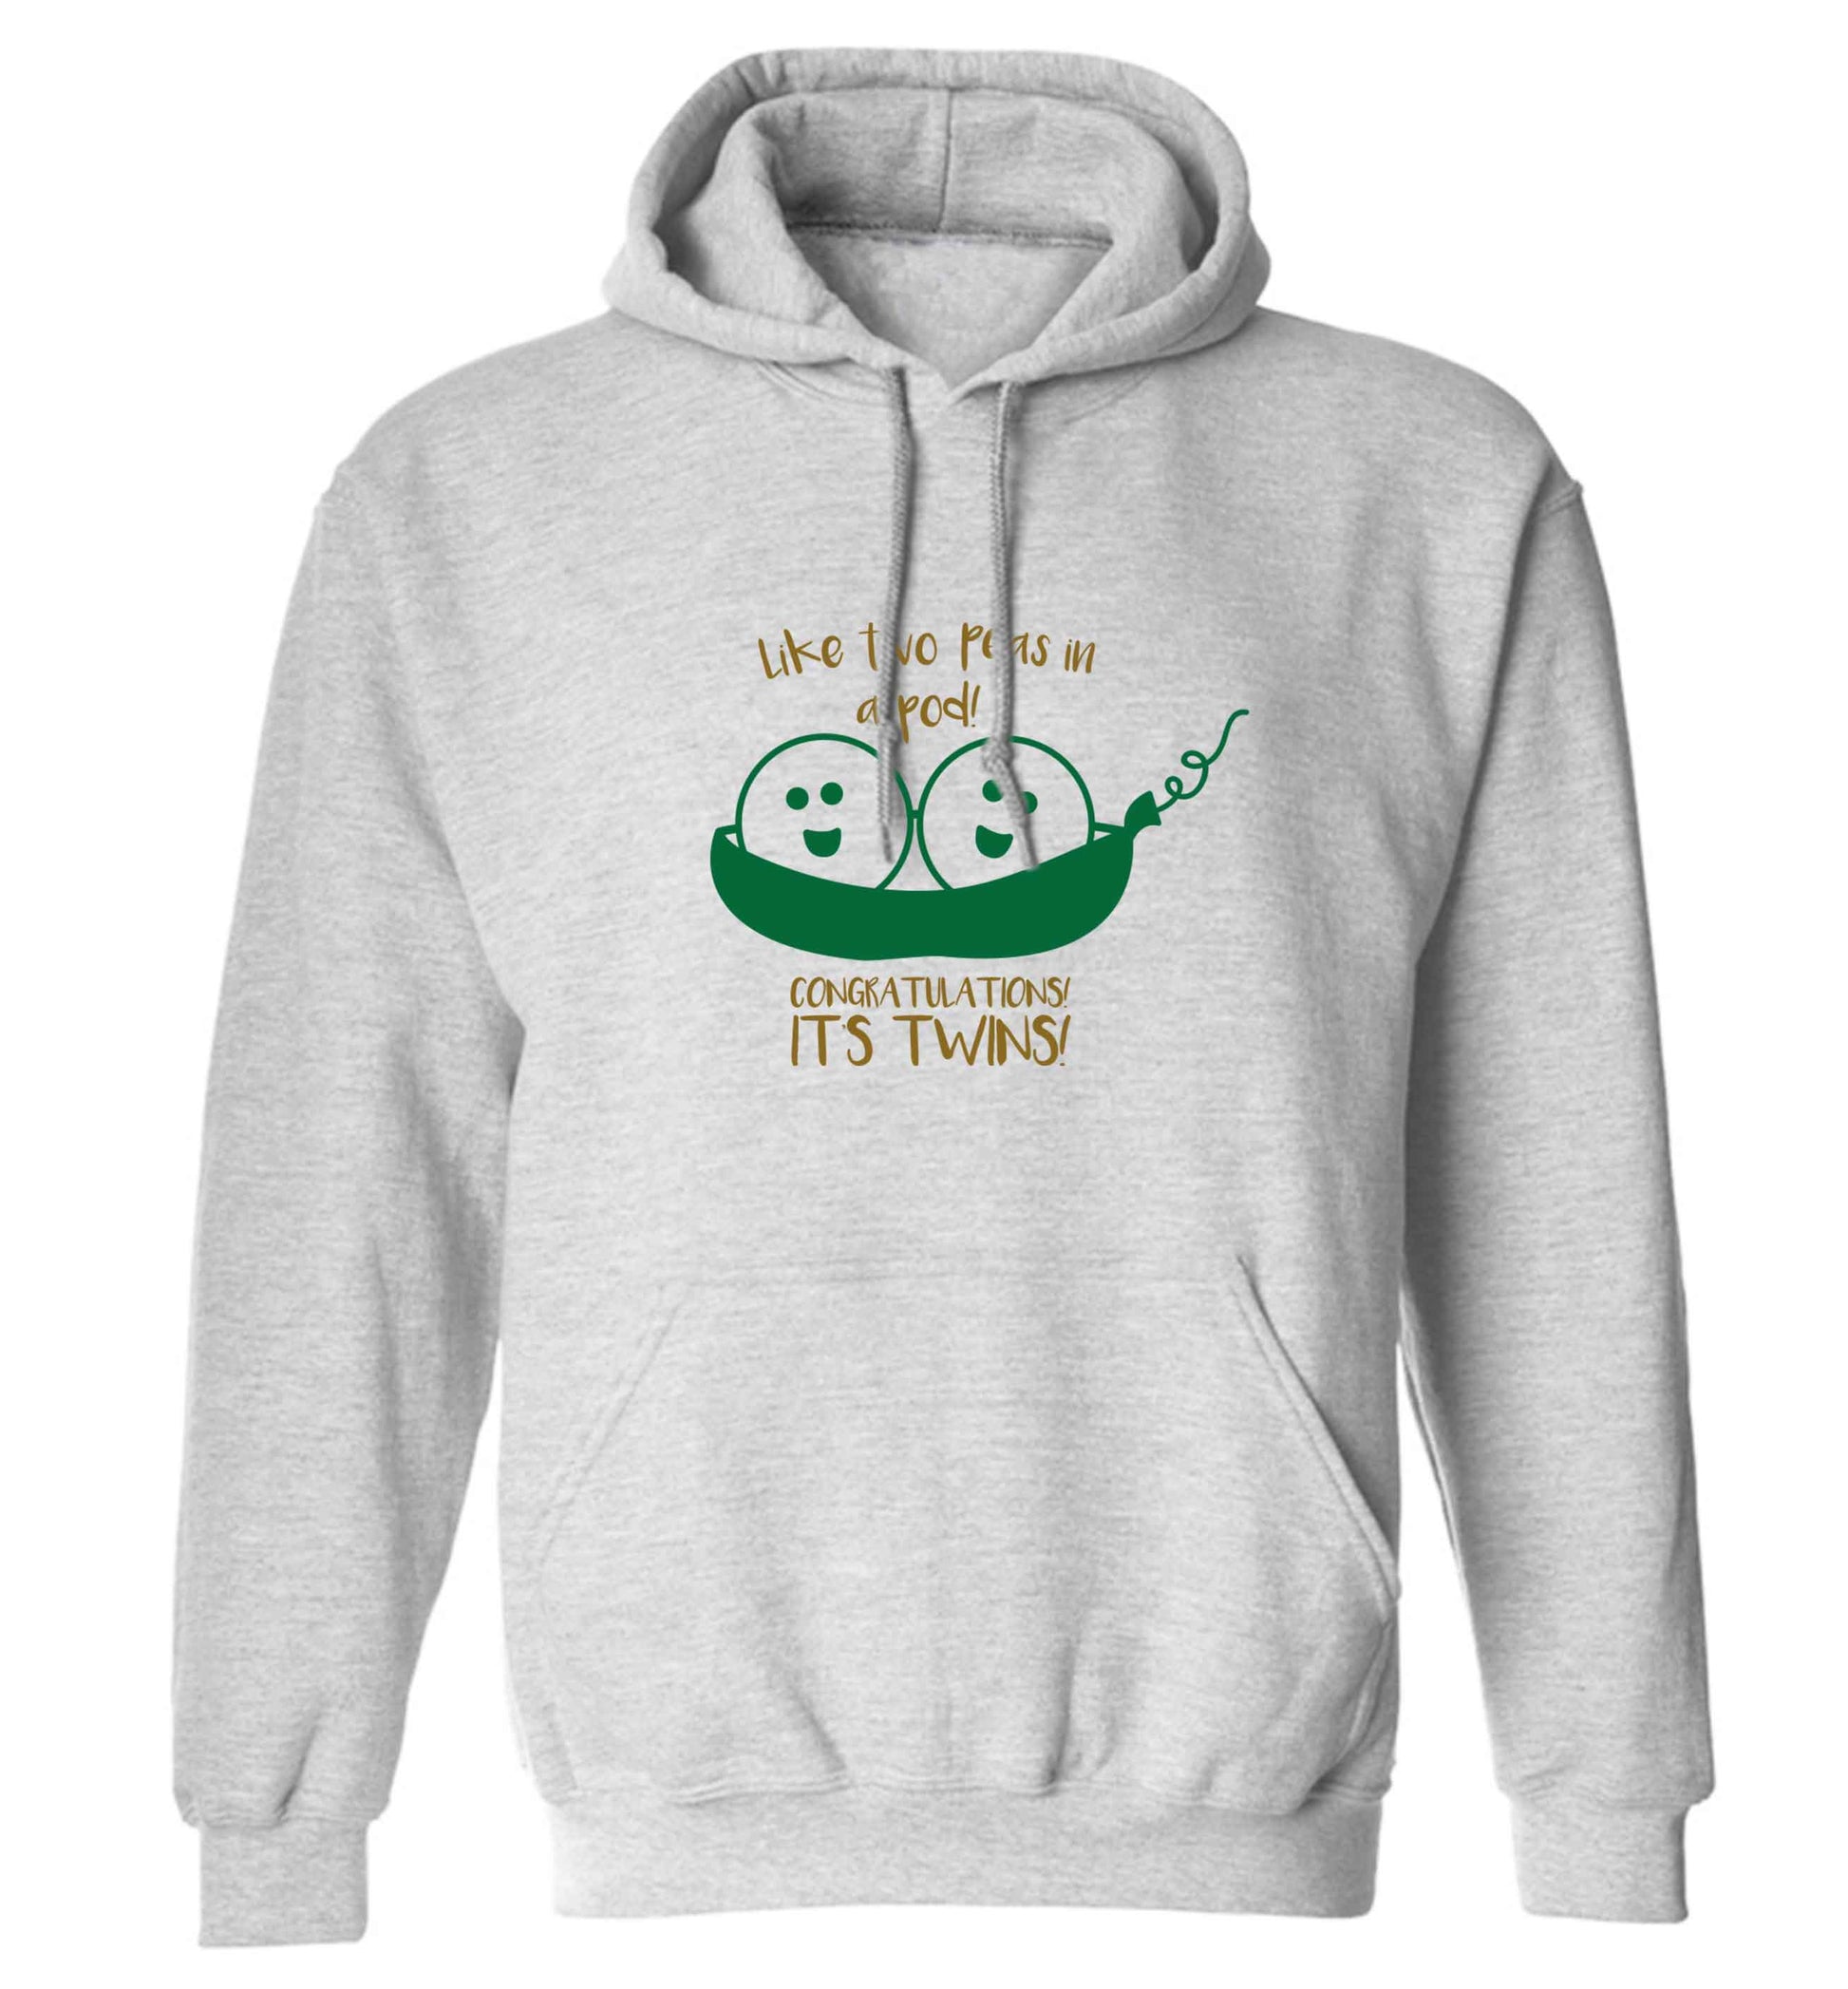 Like two peas in a pod! Congratulations it's twins! adults unisex grey hoodie 2XL